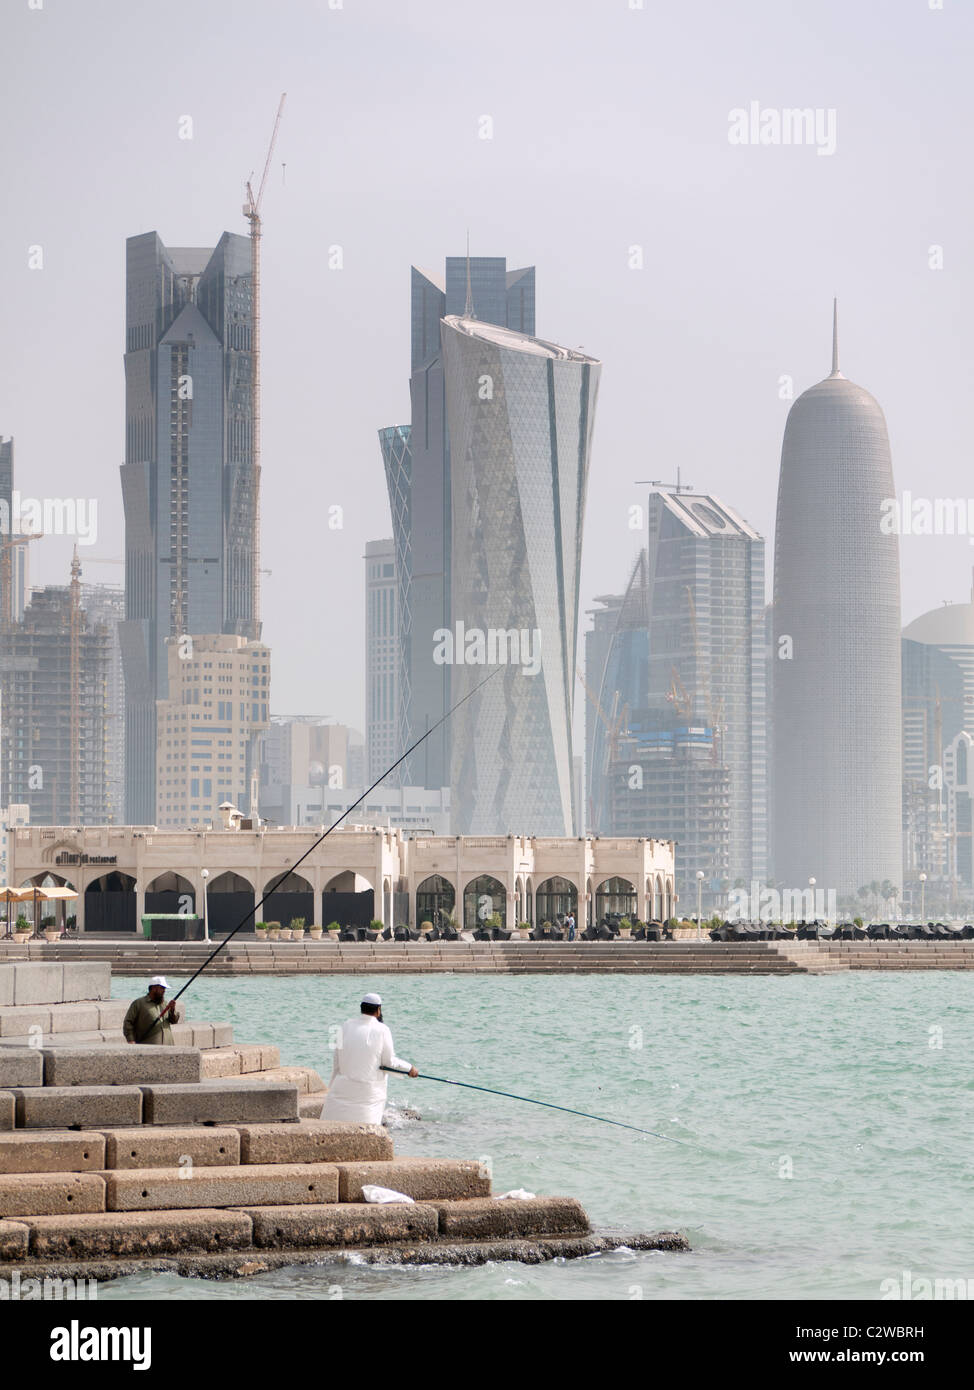 Men fishing on The Corniche with modern office towers and skyline in business district in Doha Qatar Stock Photo